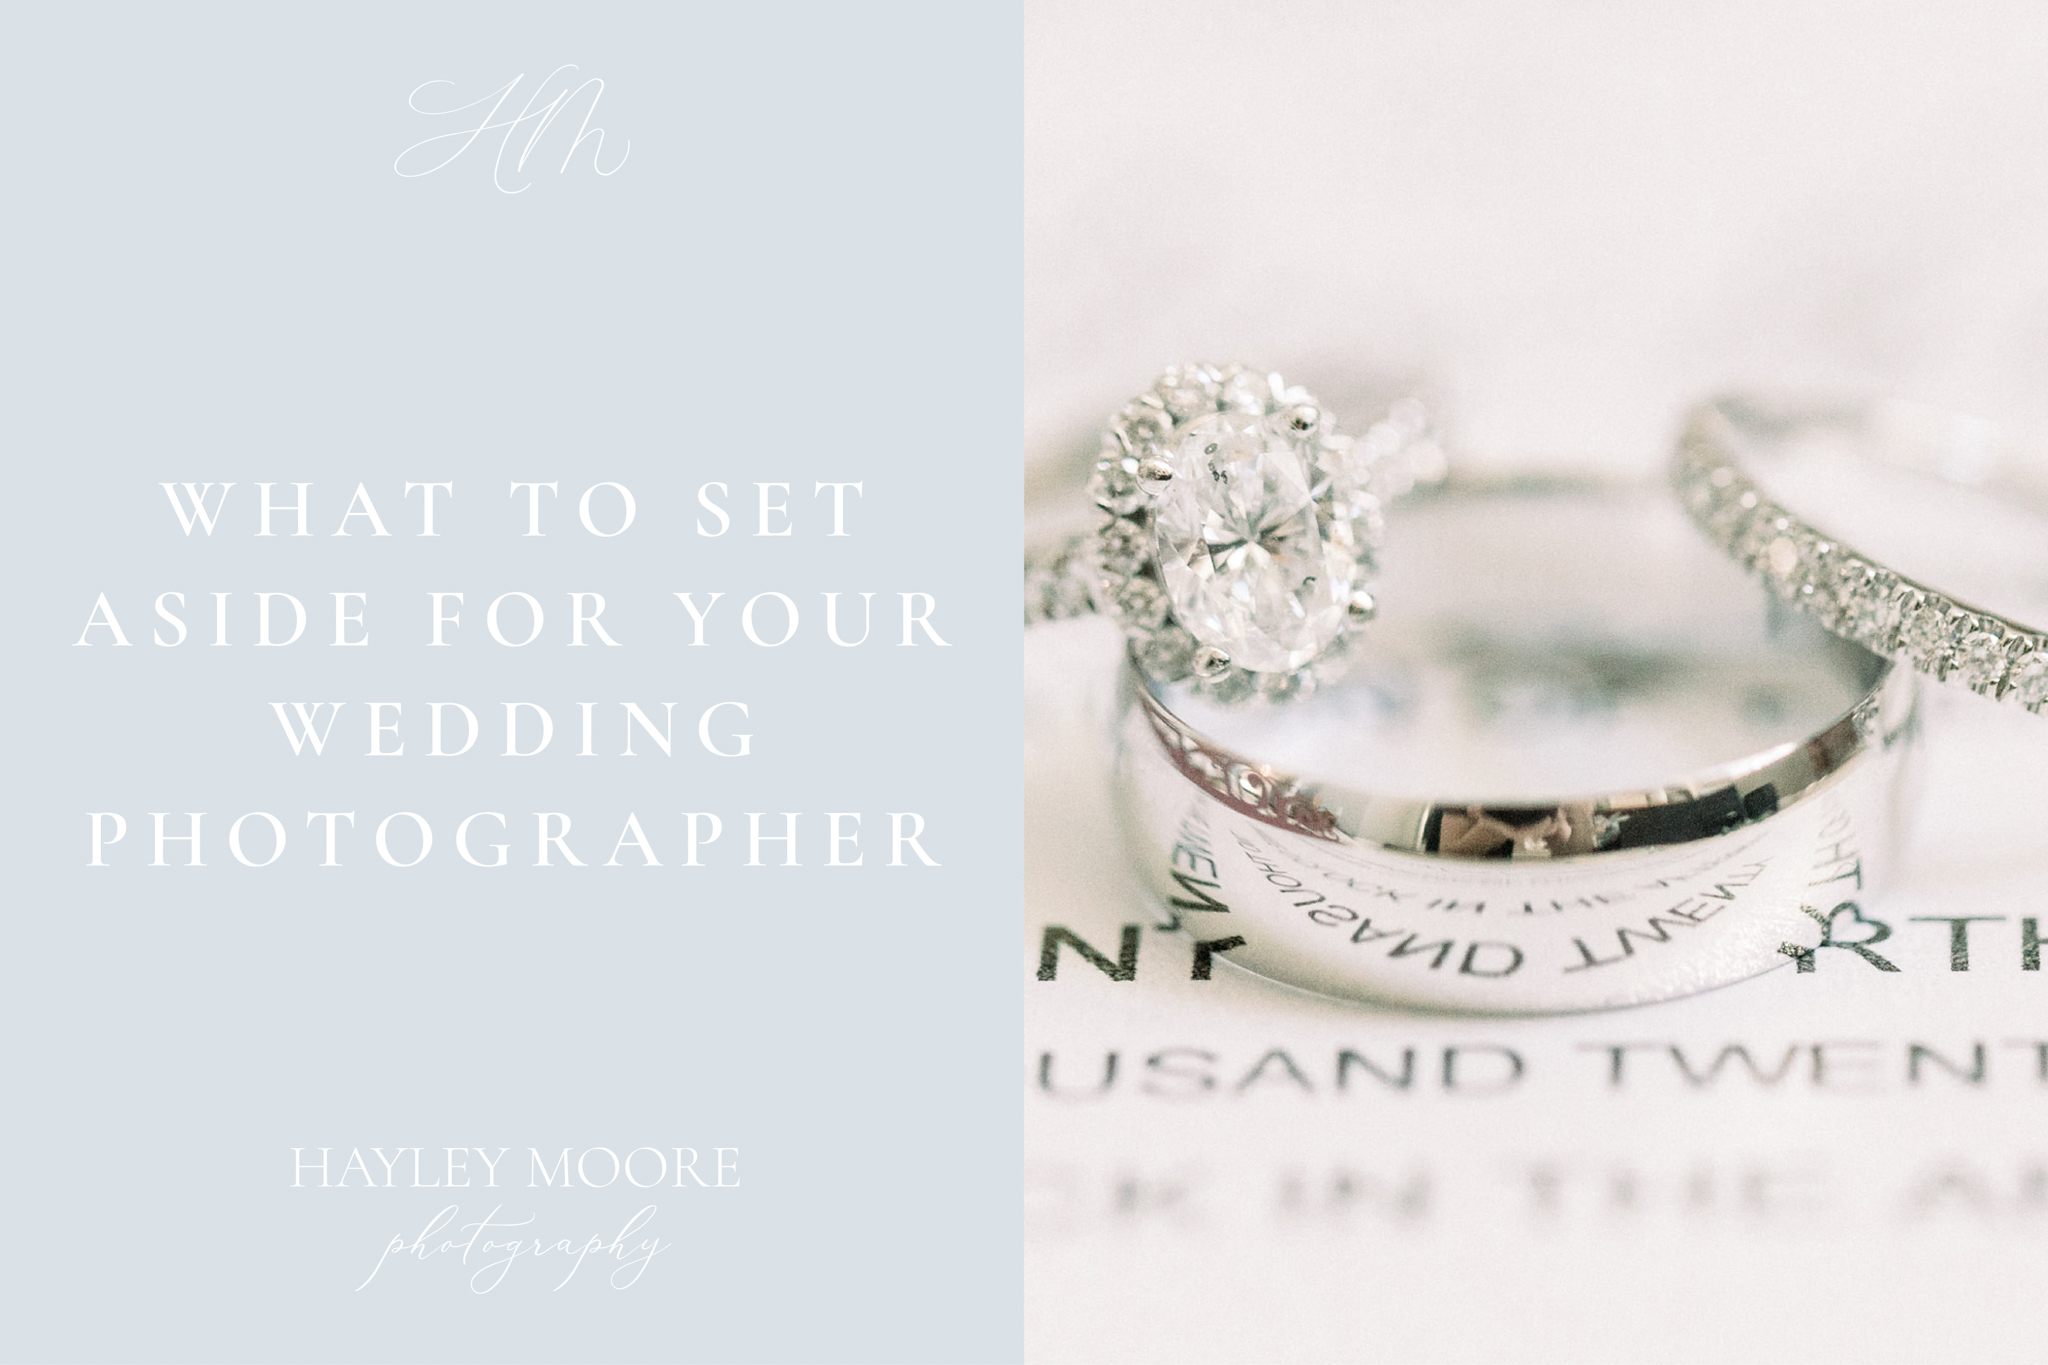 What To Set Aside For Your Wedding Photographer